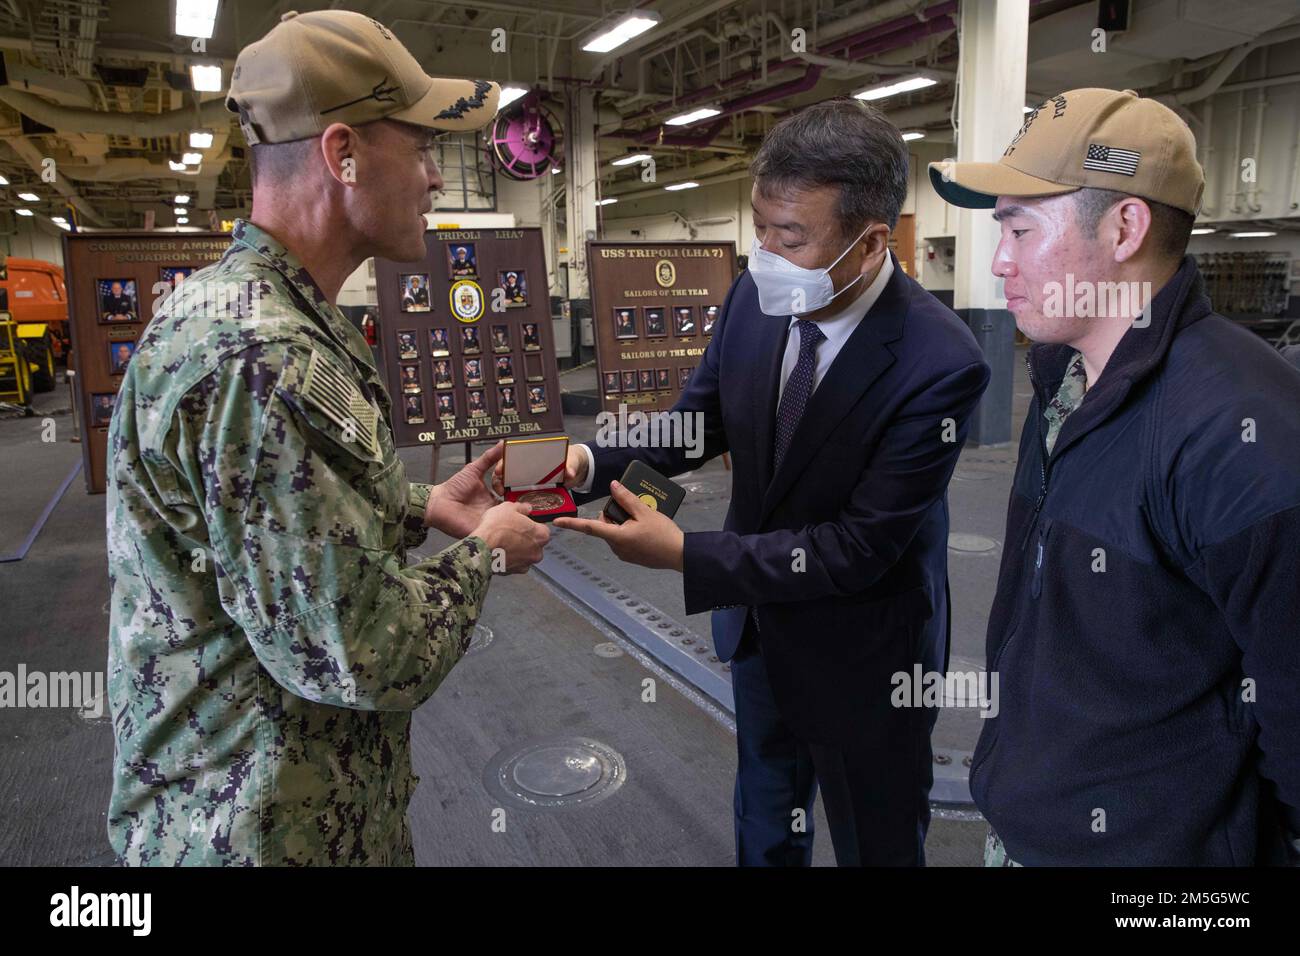 220316-N-CZ759-1088 SAN DIEGO (March 16, 2022) -- Director General  Guck-Cheol Bang, center, Director General of the Naval Ship Program  Department, Republic of Korea Defense Acquisition Program Administration,  presents a gift to amphibious